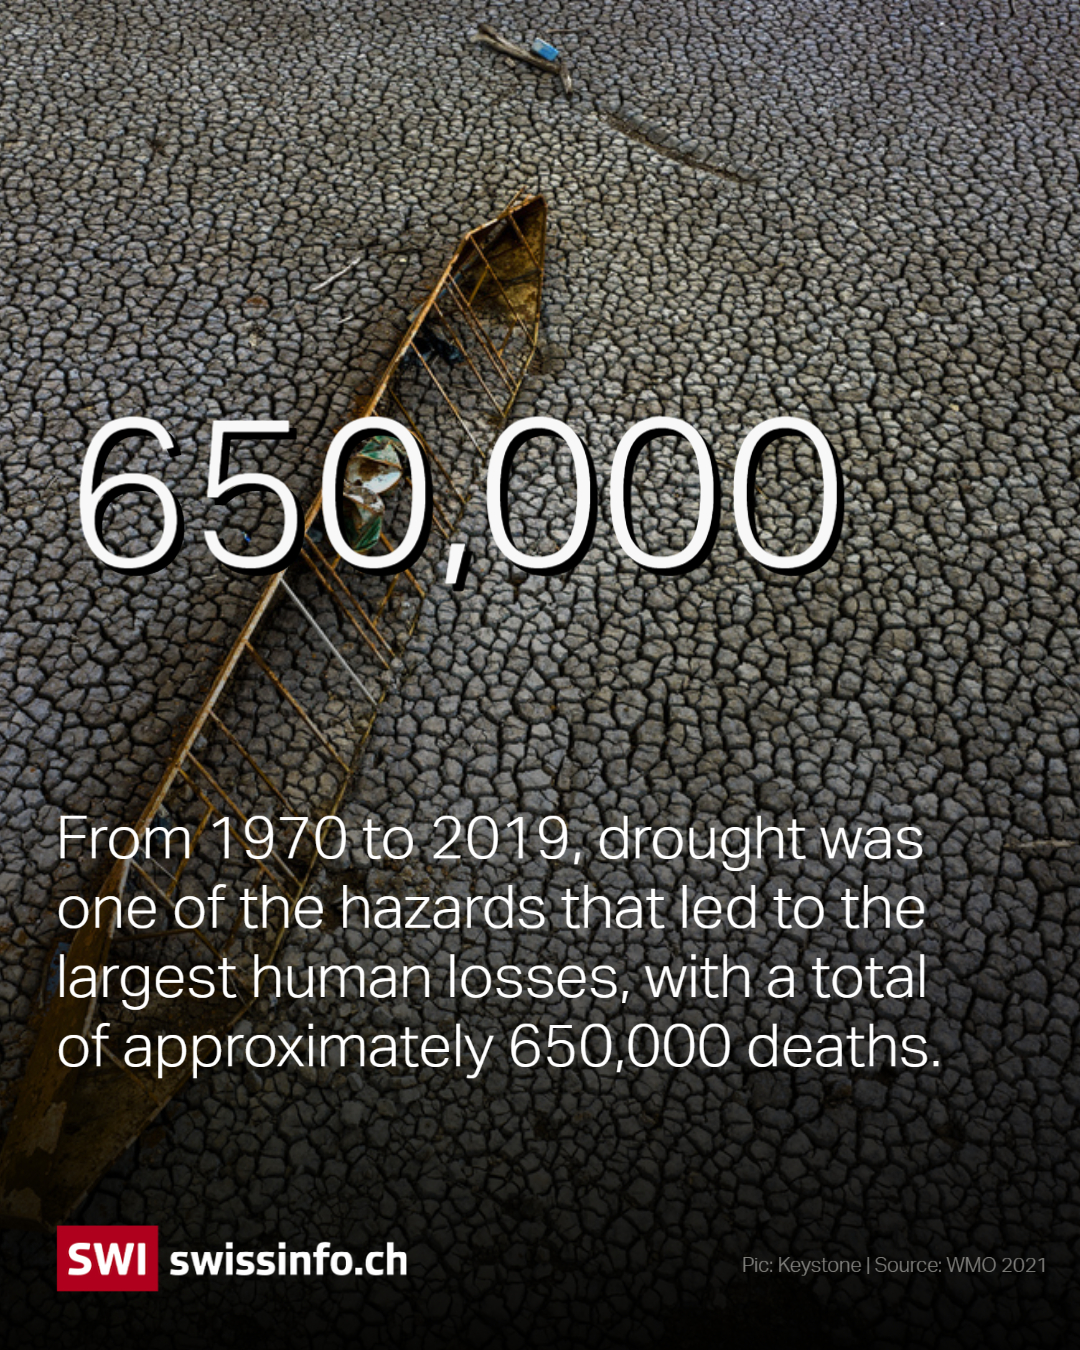 From 1970-2019 droughts have cause an estimated 650,000 deaths